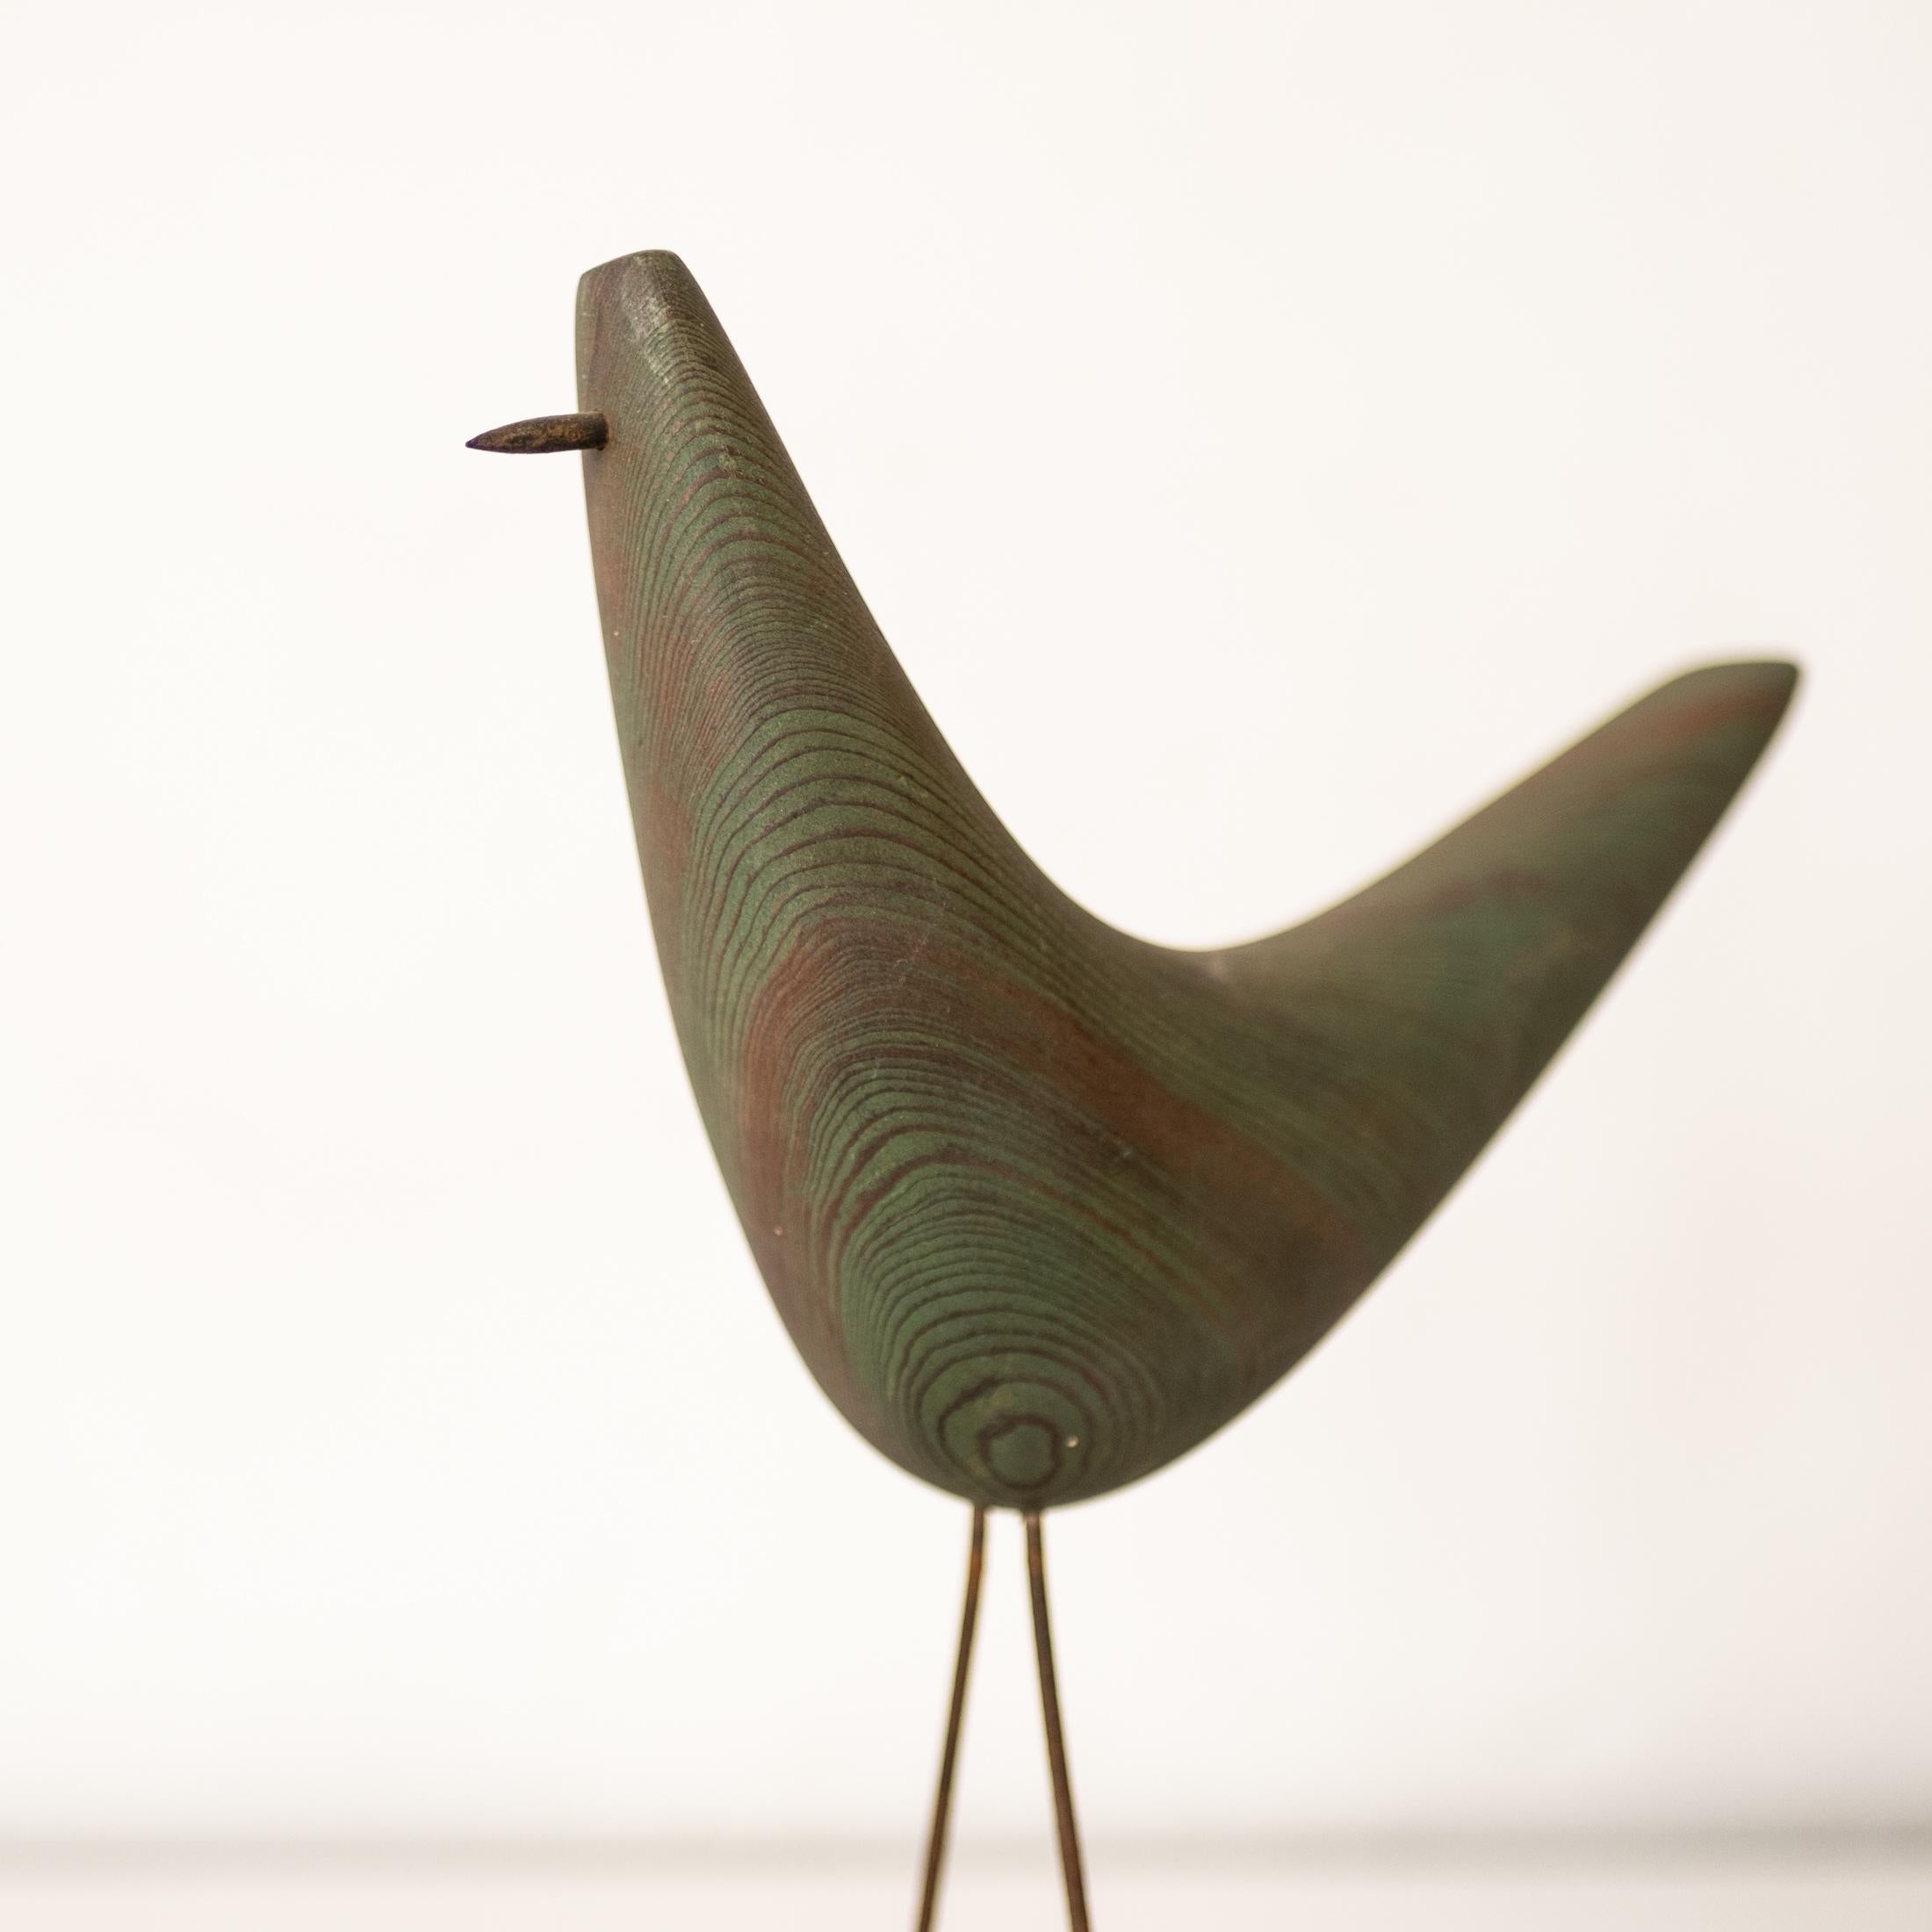 Modernist Mid-Century Wood and Stone Bird Sculpture In Good Condition For Sale In San Diego, CA